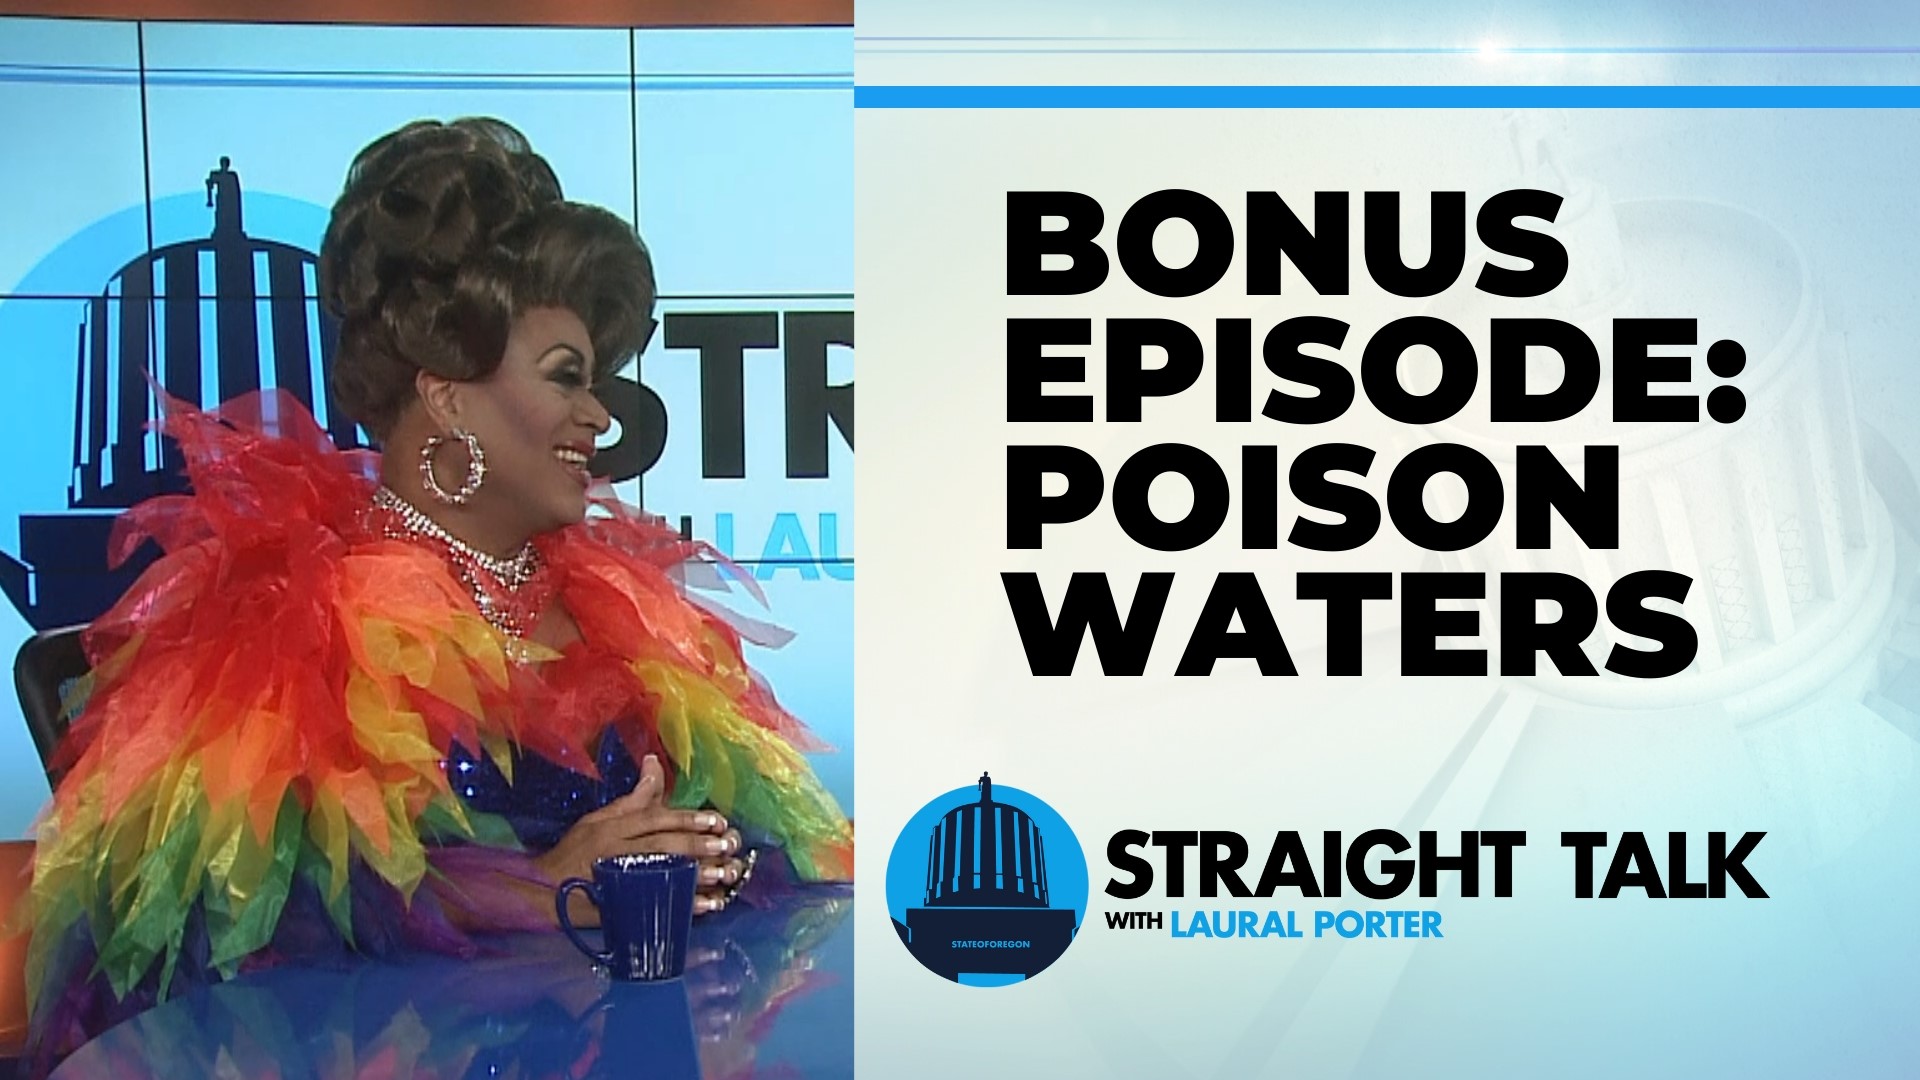 Drag performer Poison Waters was a guest on Straight Talk and stayed with us for a bonus episode after the show.